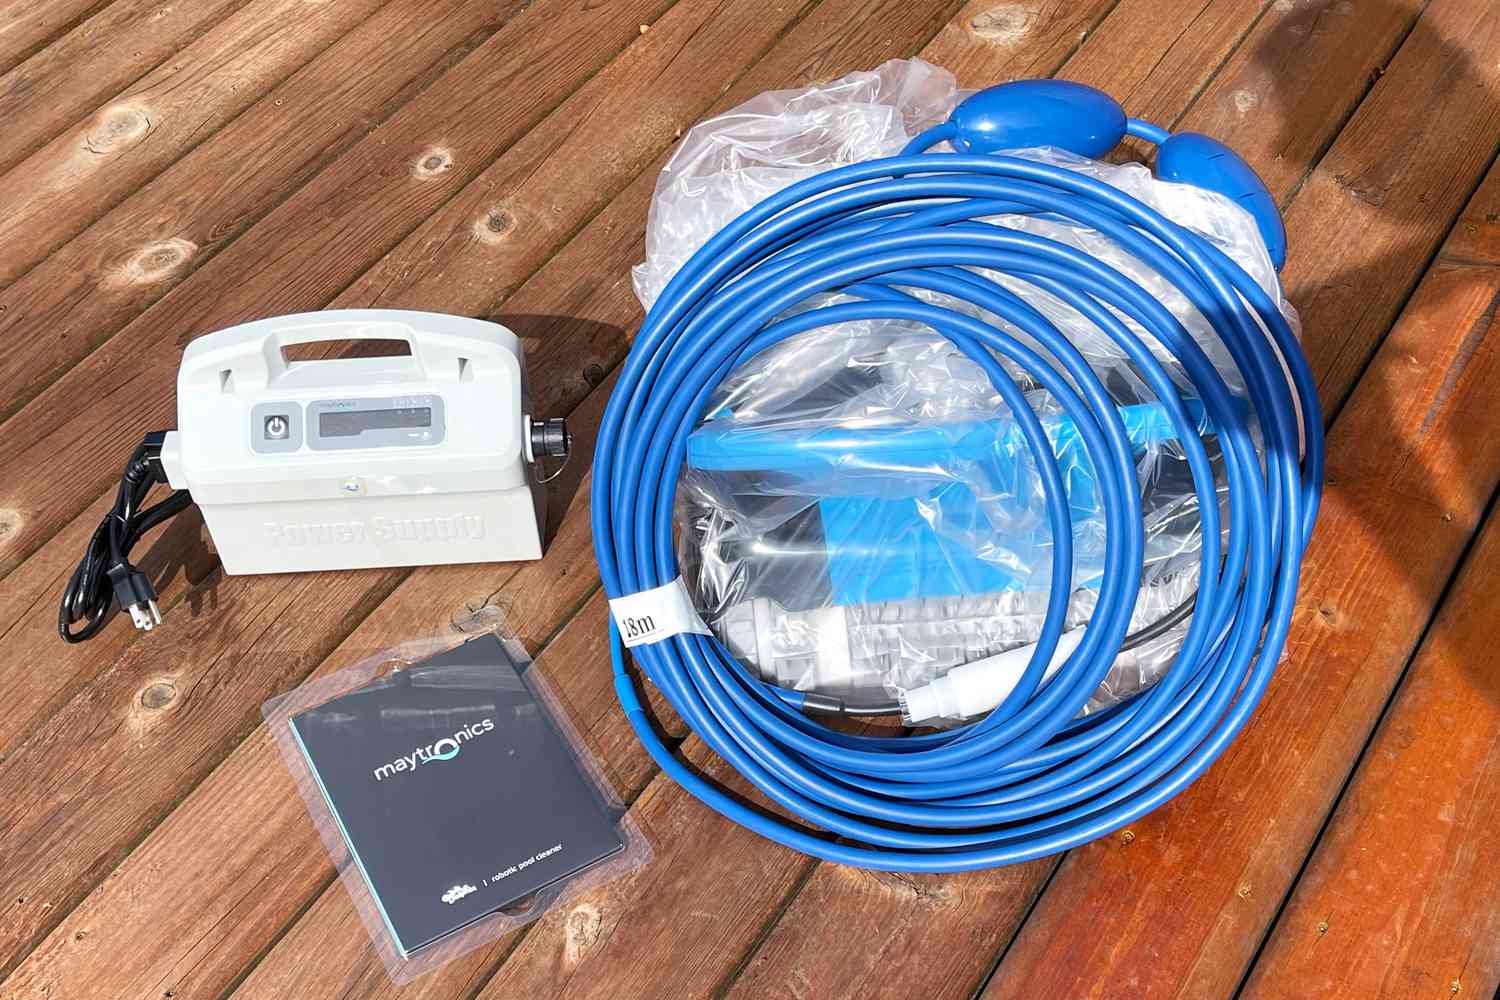 Dolphin Nautilus CC Plus Robotic Pool Cleaner bagged parts displayed on wooden deck